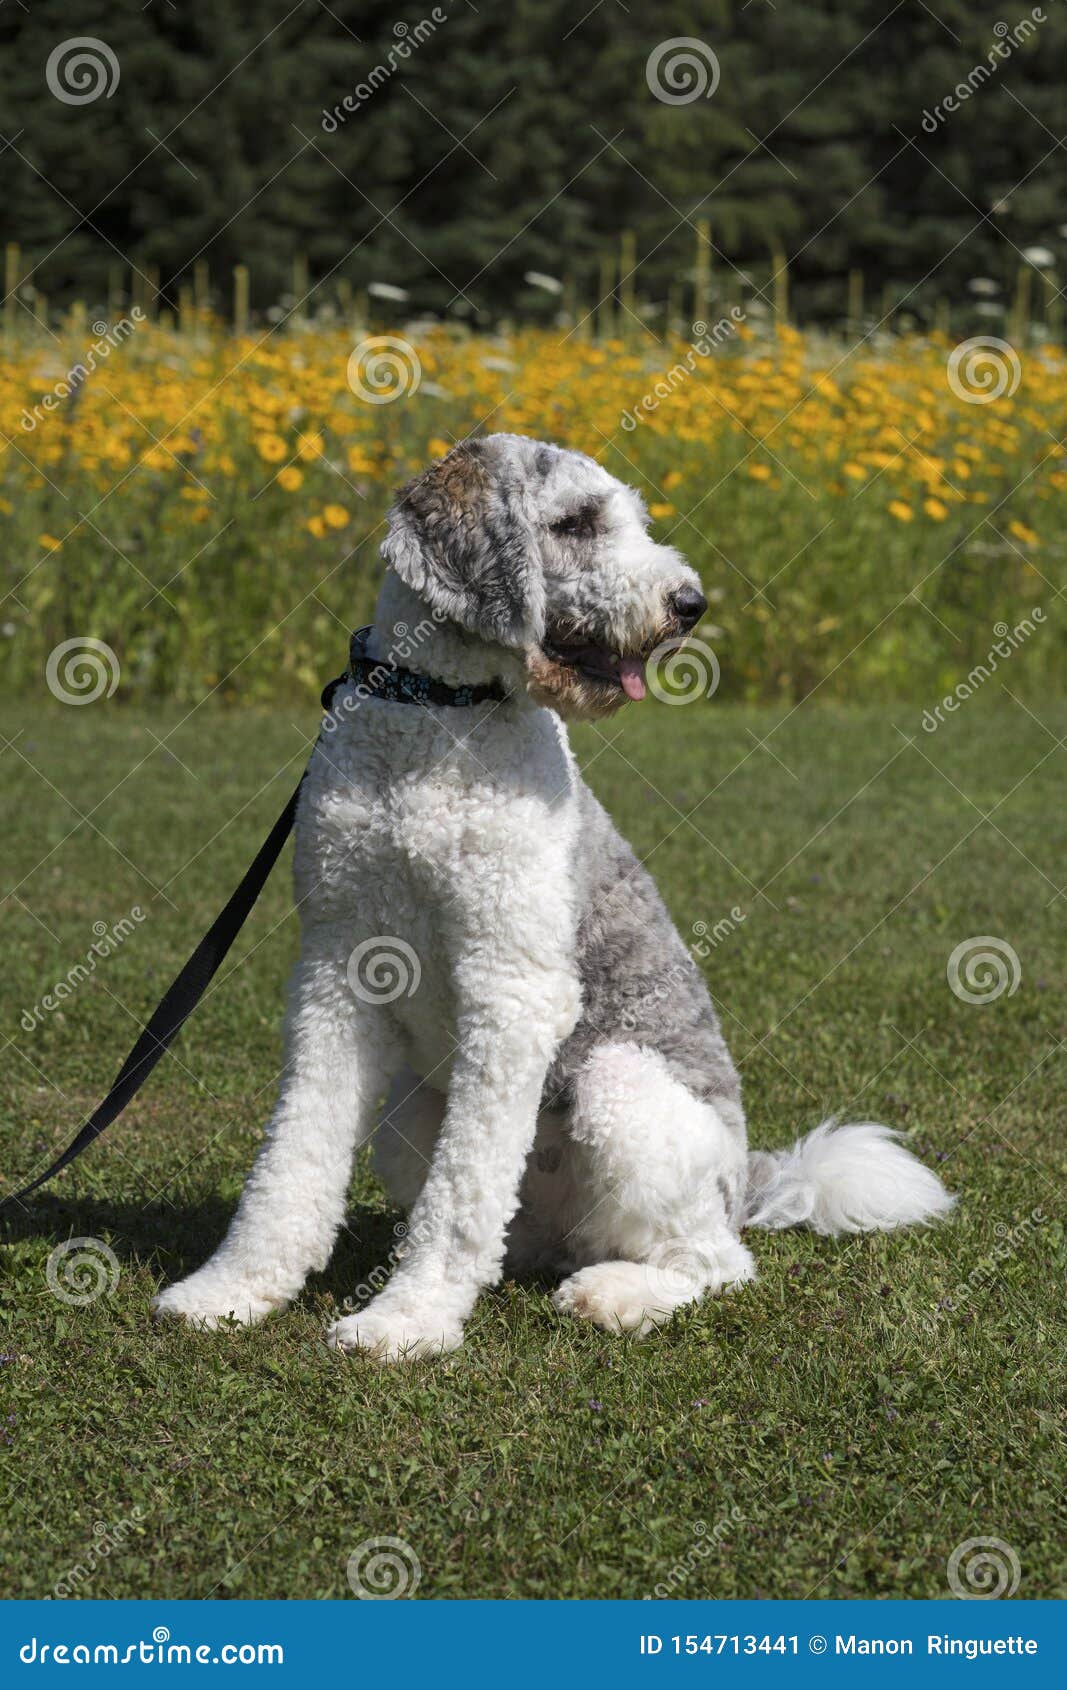 grey and white poodle